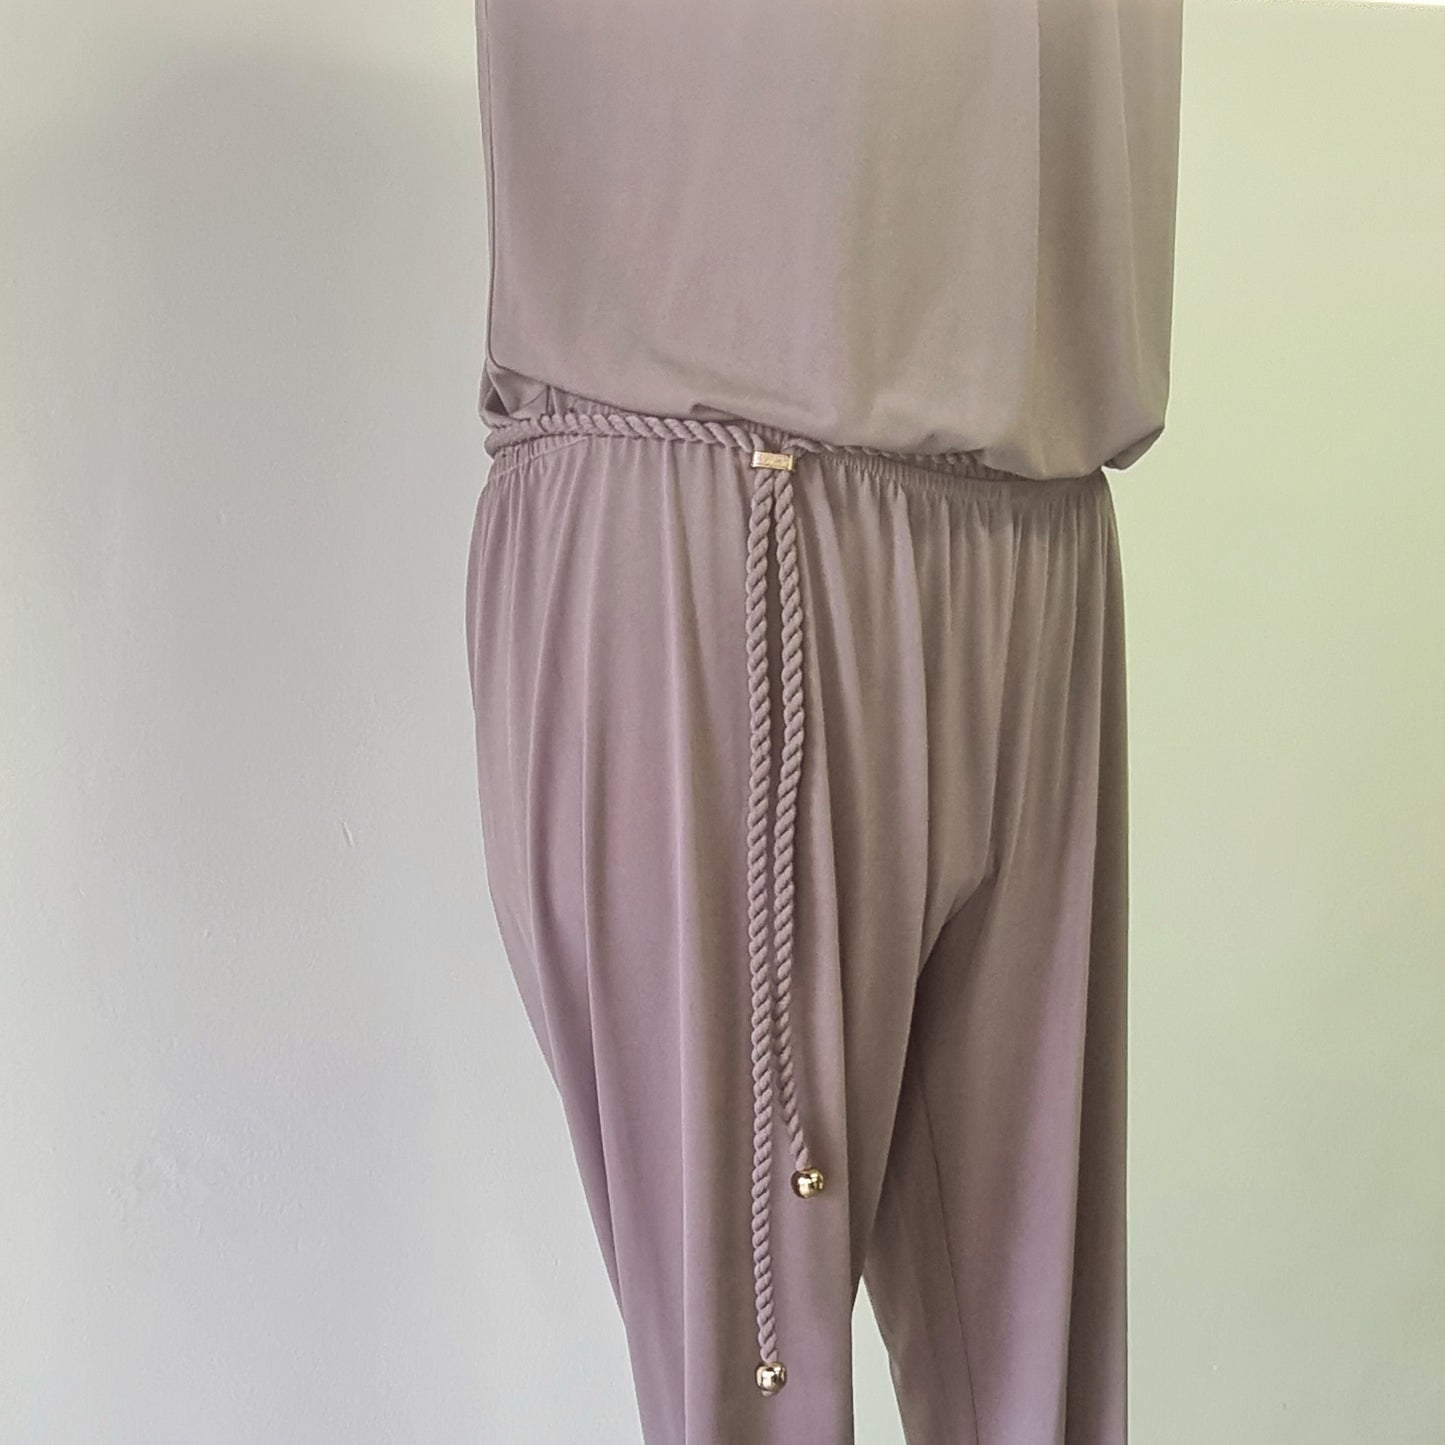 Magistral - Formal fawn strap jumpsuit